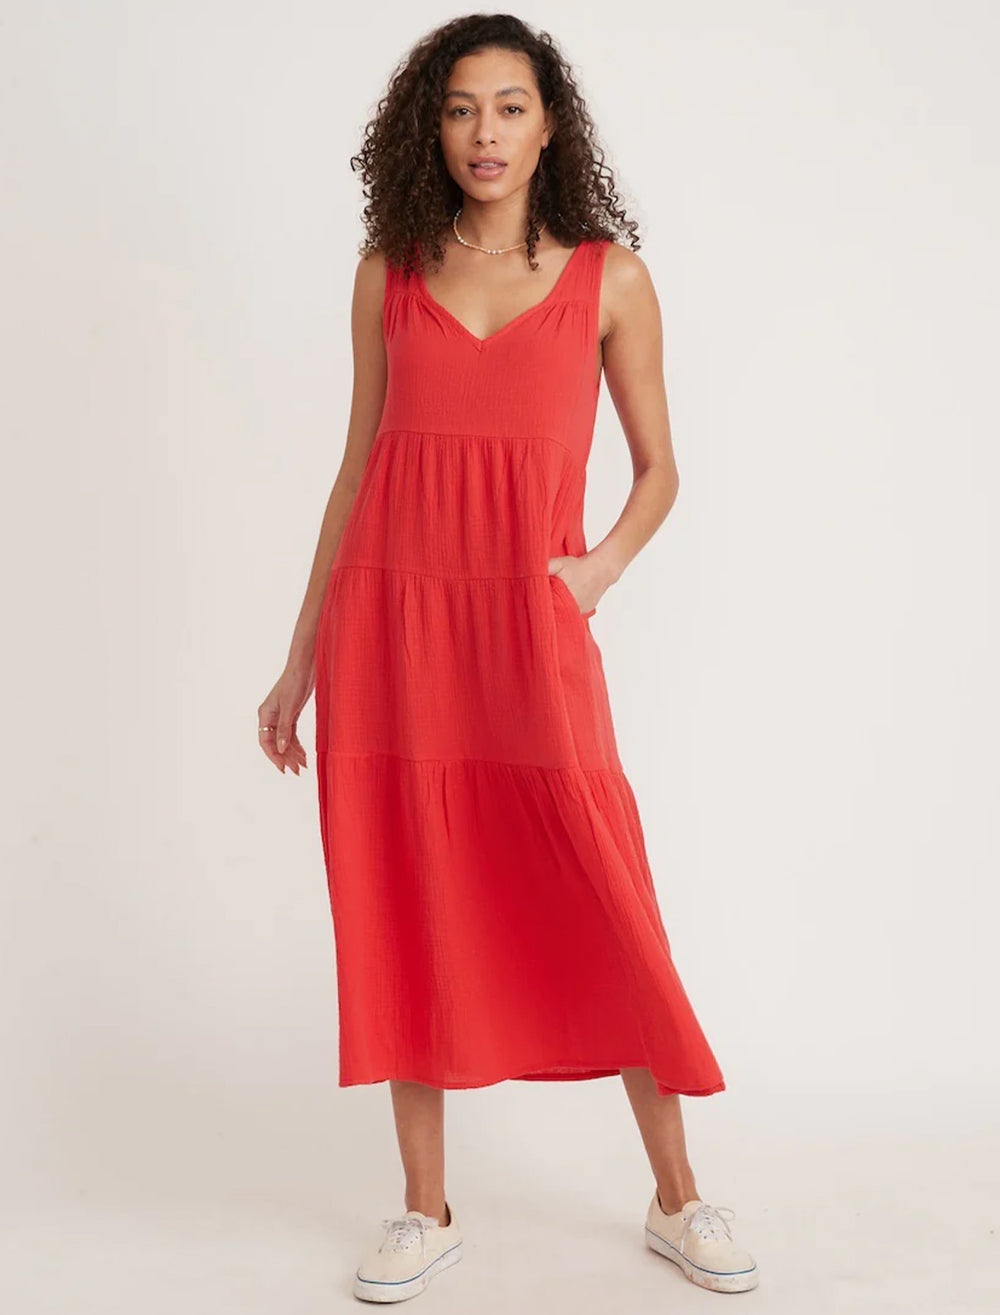 Model wearing Marine Layer's corinne maxi dress in red.